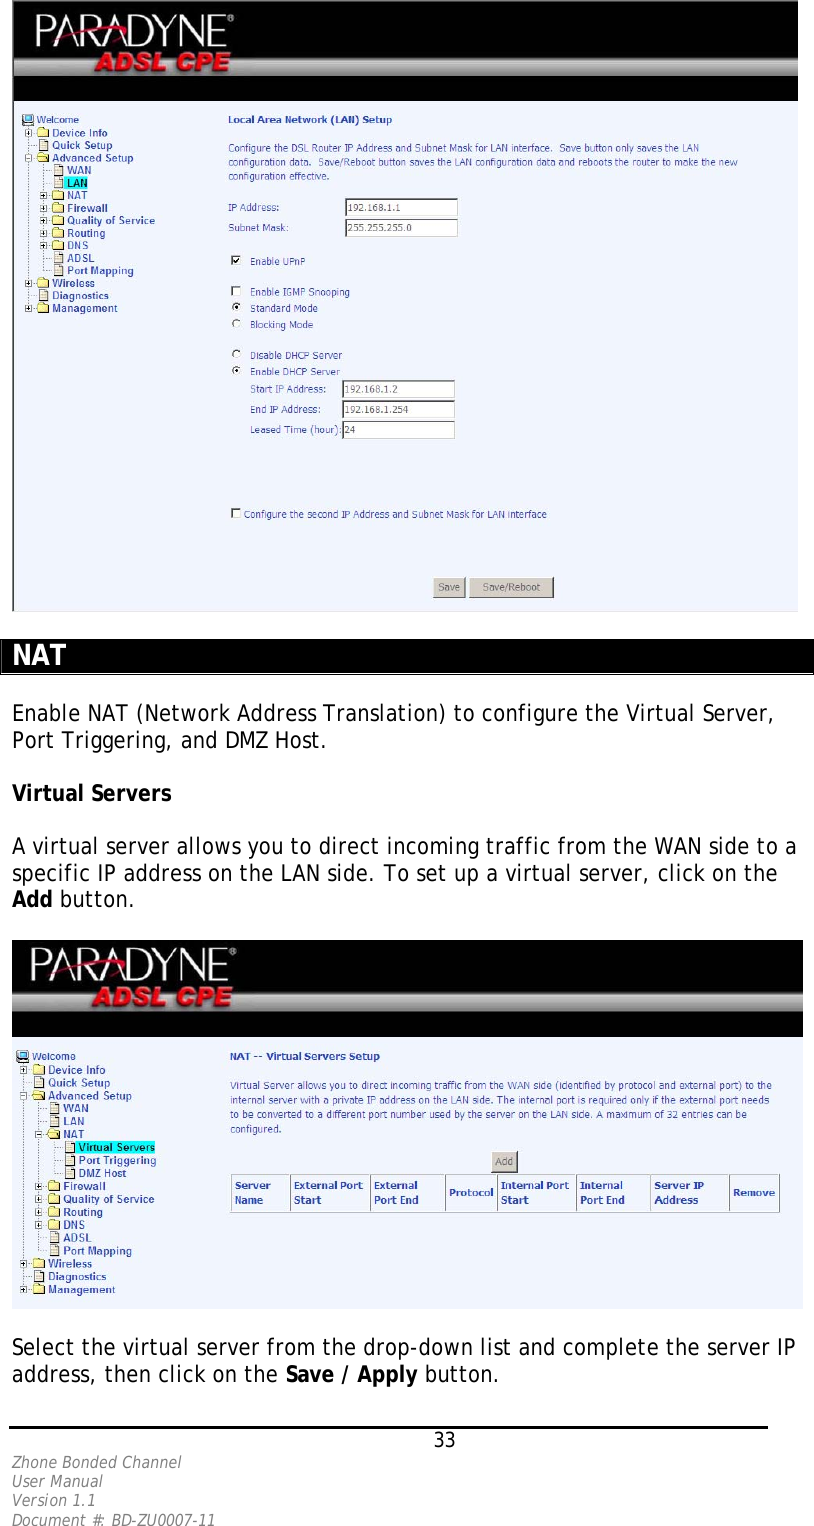   NAT   Enable NAT (Network Address Translation) to configure the Virtual Server, Port Triggering, and DMZ Host.  Virtual Servers  A virtual server allows you to direct incoming traffic from the WAN side to a specific IP address on the LAN side. To set up a virtual server, click on the Add button.      Select the virtual server from the drop-down list and complete the server IP address, then click on the Save / Apply button.   33 Zhone Bonded Channel User Manual  Version 1.1 Document #: BD-ZU0007-11 